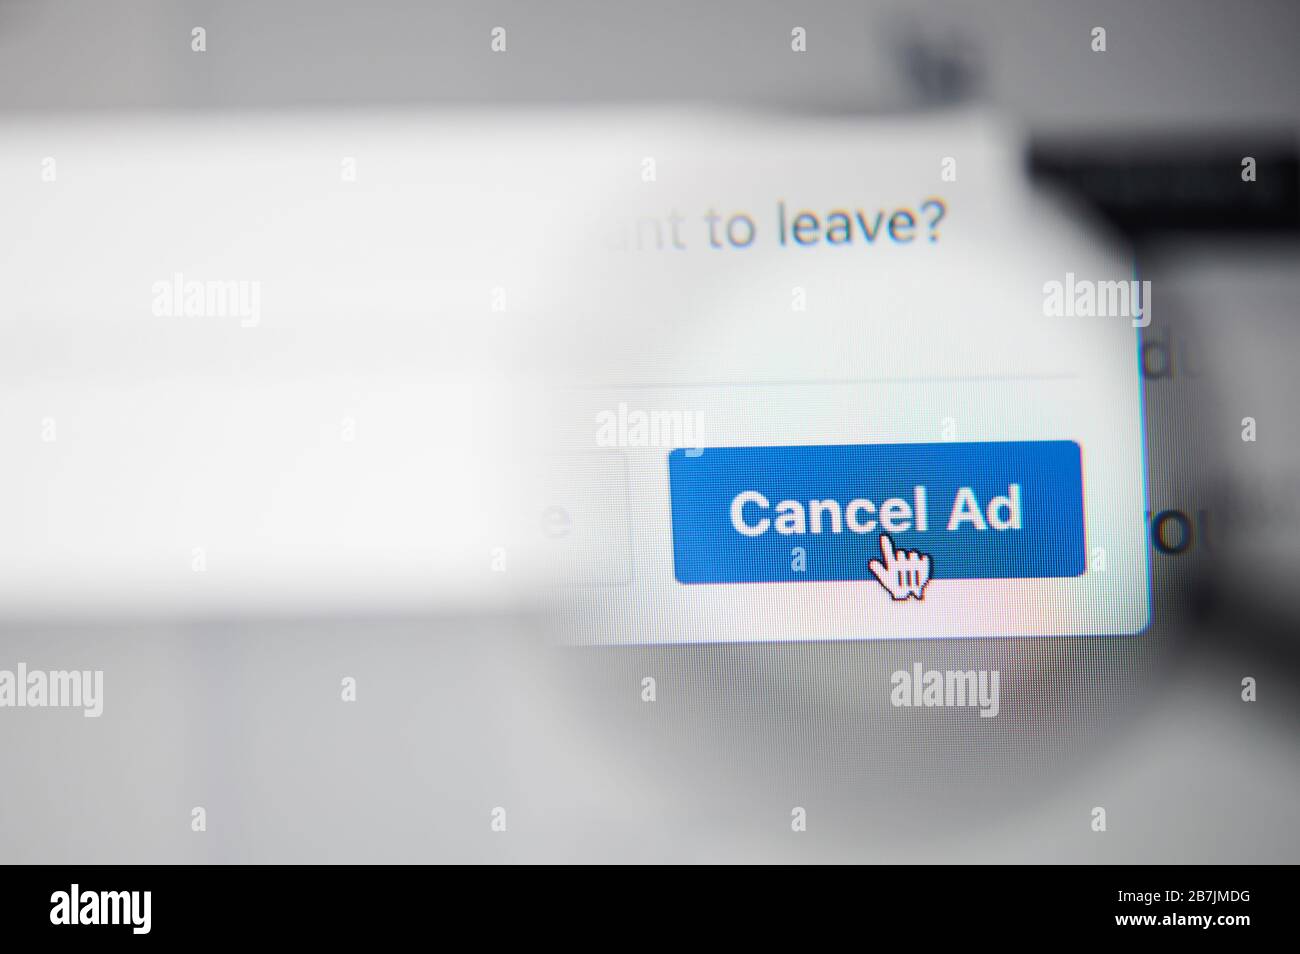 New-York , USA - March 13, 2020: Cancel ad in social media on laptop close up view throw magnifier Stock Photo